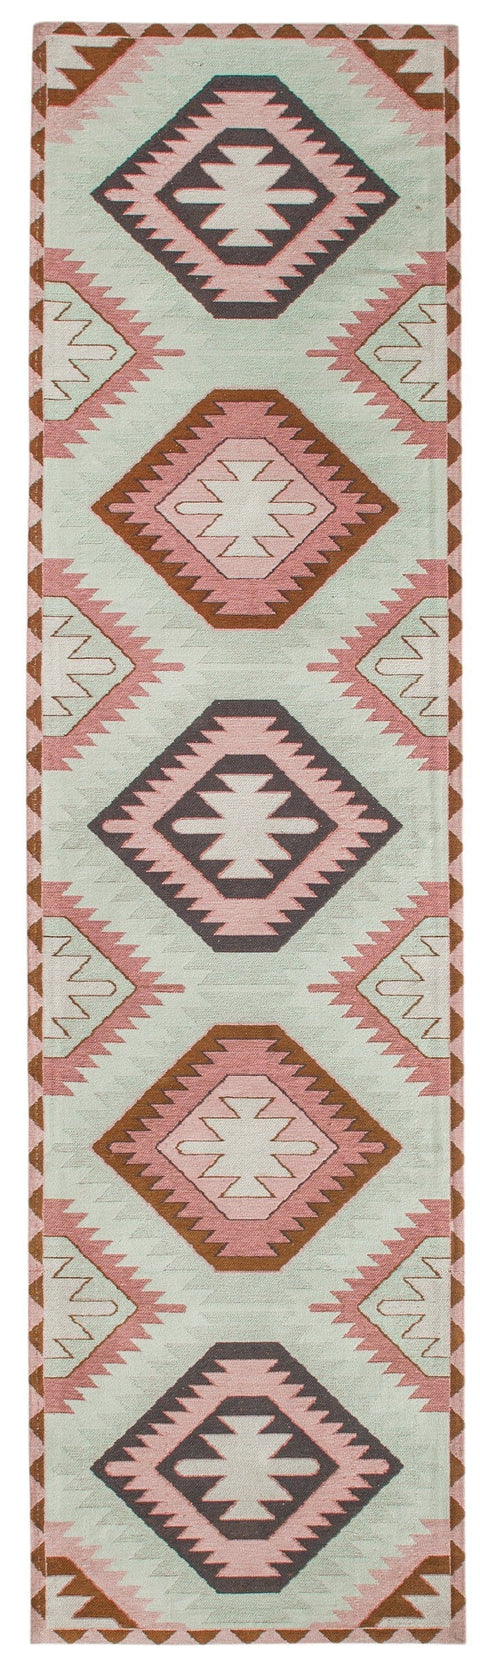 Suzie Pink and Green Pastel Tribal Pattern Runner Rug